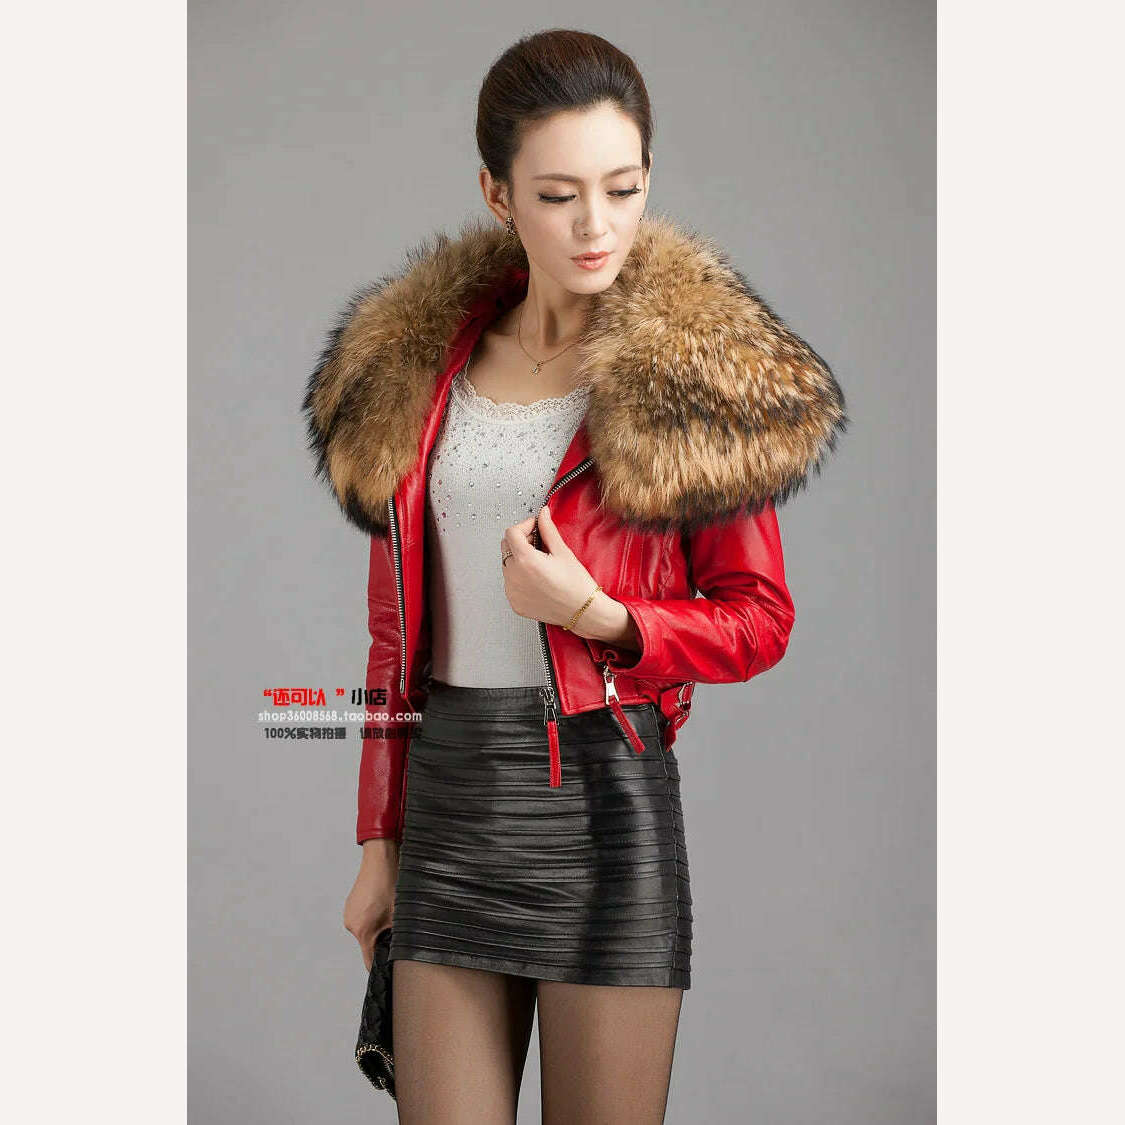 KIMLUD, Autumn Winter Women Genuine Sheepskin Leather Jacket Real Leather Coat with Ultra Large Raccoon Fur Collar Fashion Streetwear, red / S bust 86cm, KIMLUD Womens Clothes